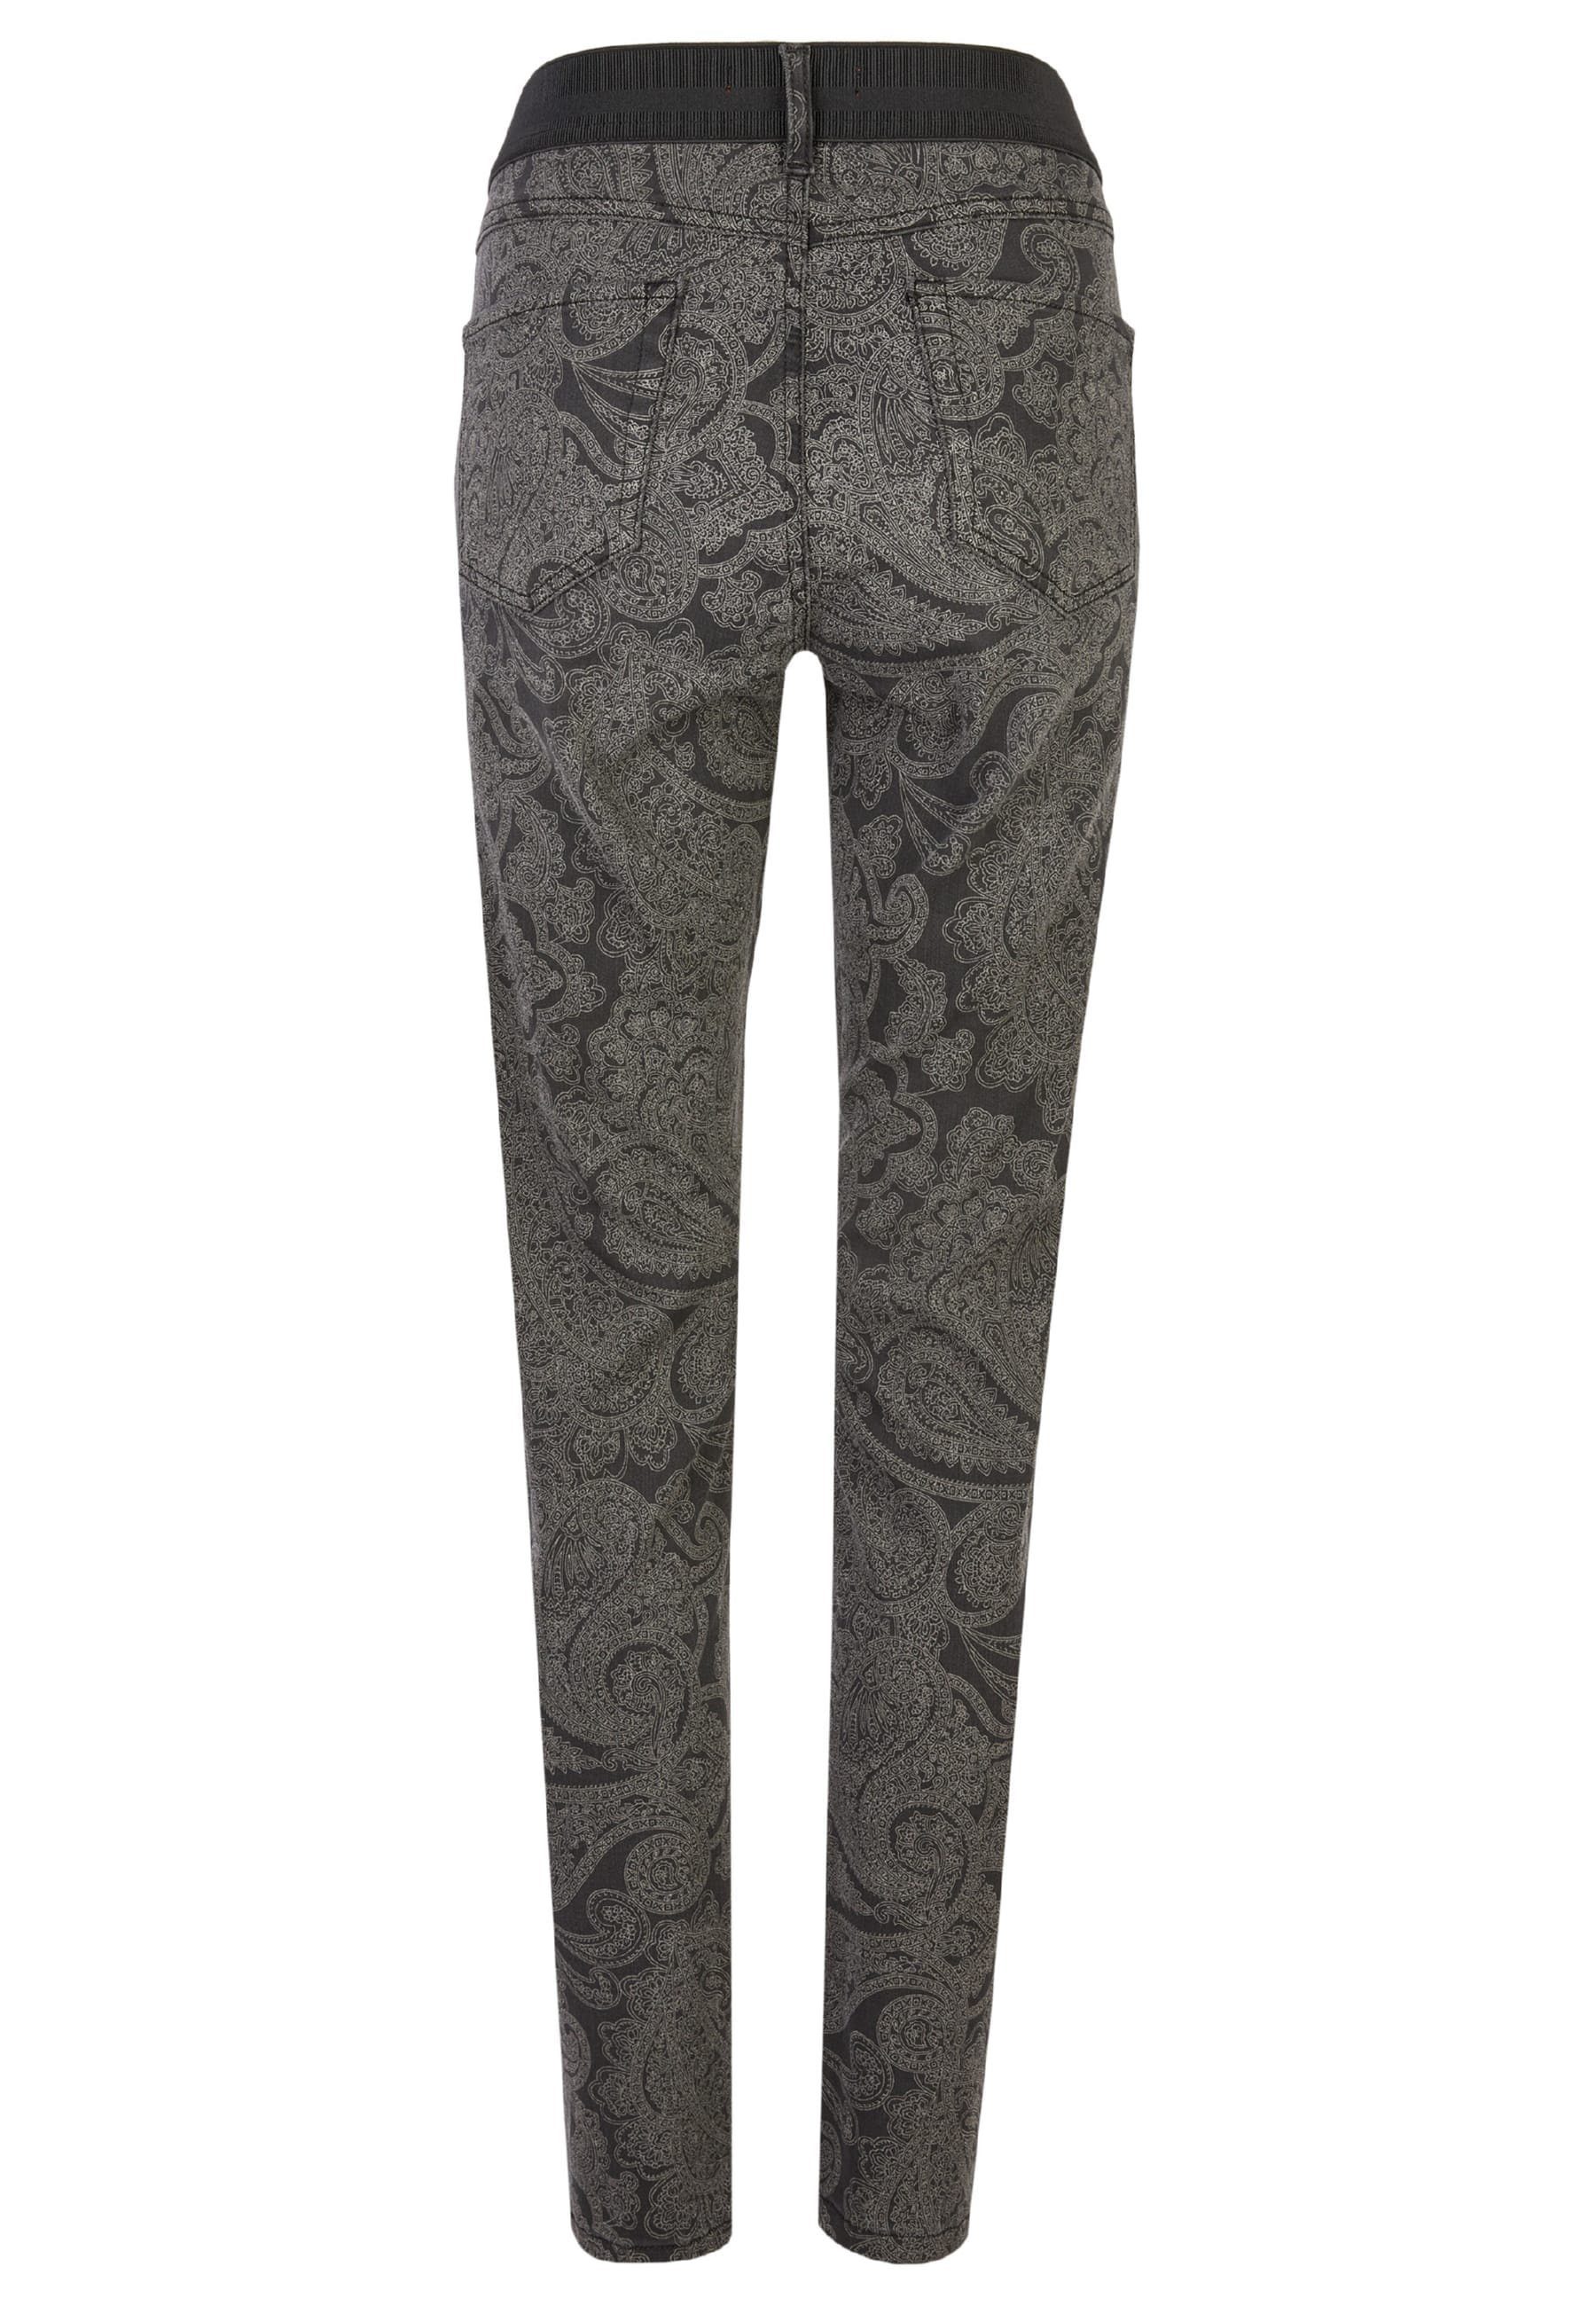 anthrazit Label-Applikationen Slim-fit-Jeans Paisley-Muster Jeans Size mit One ANGELS mit